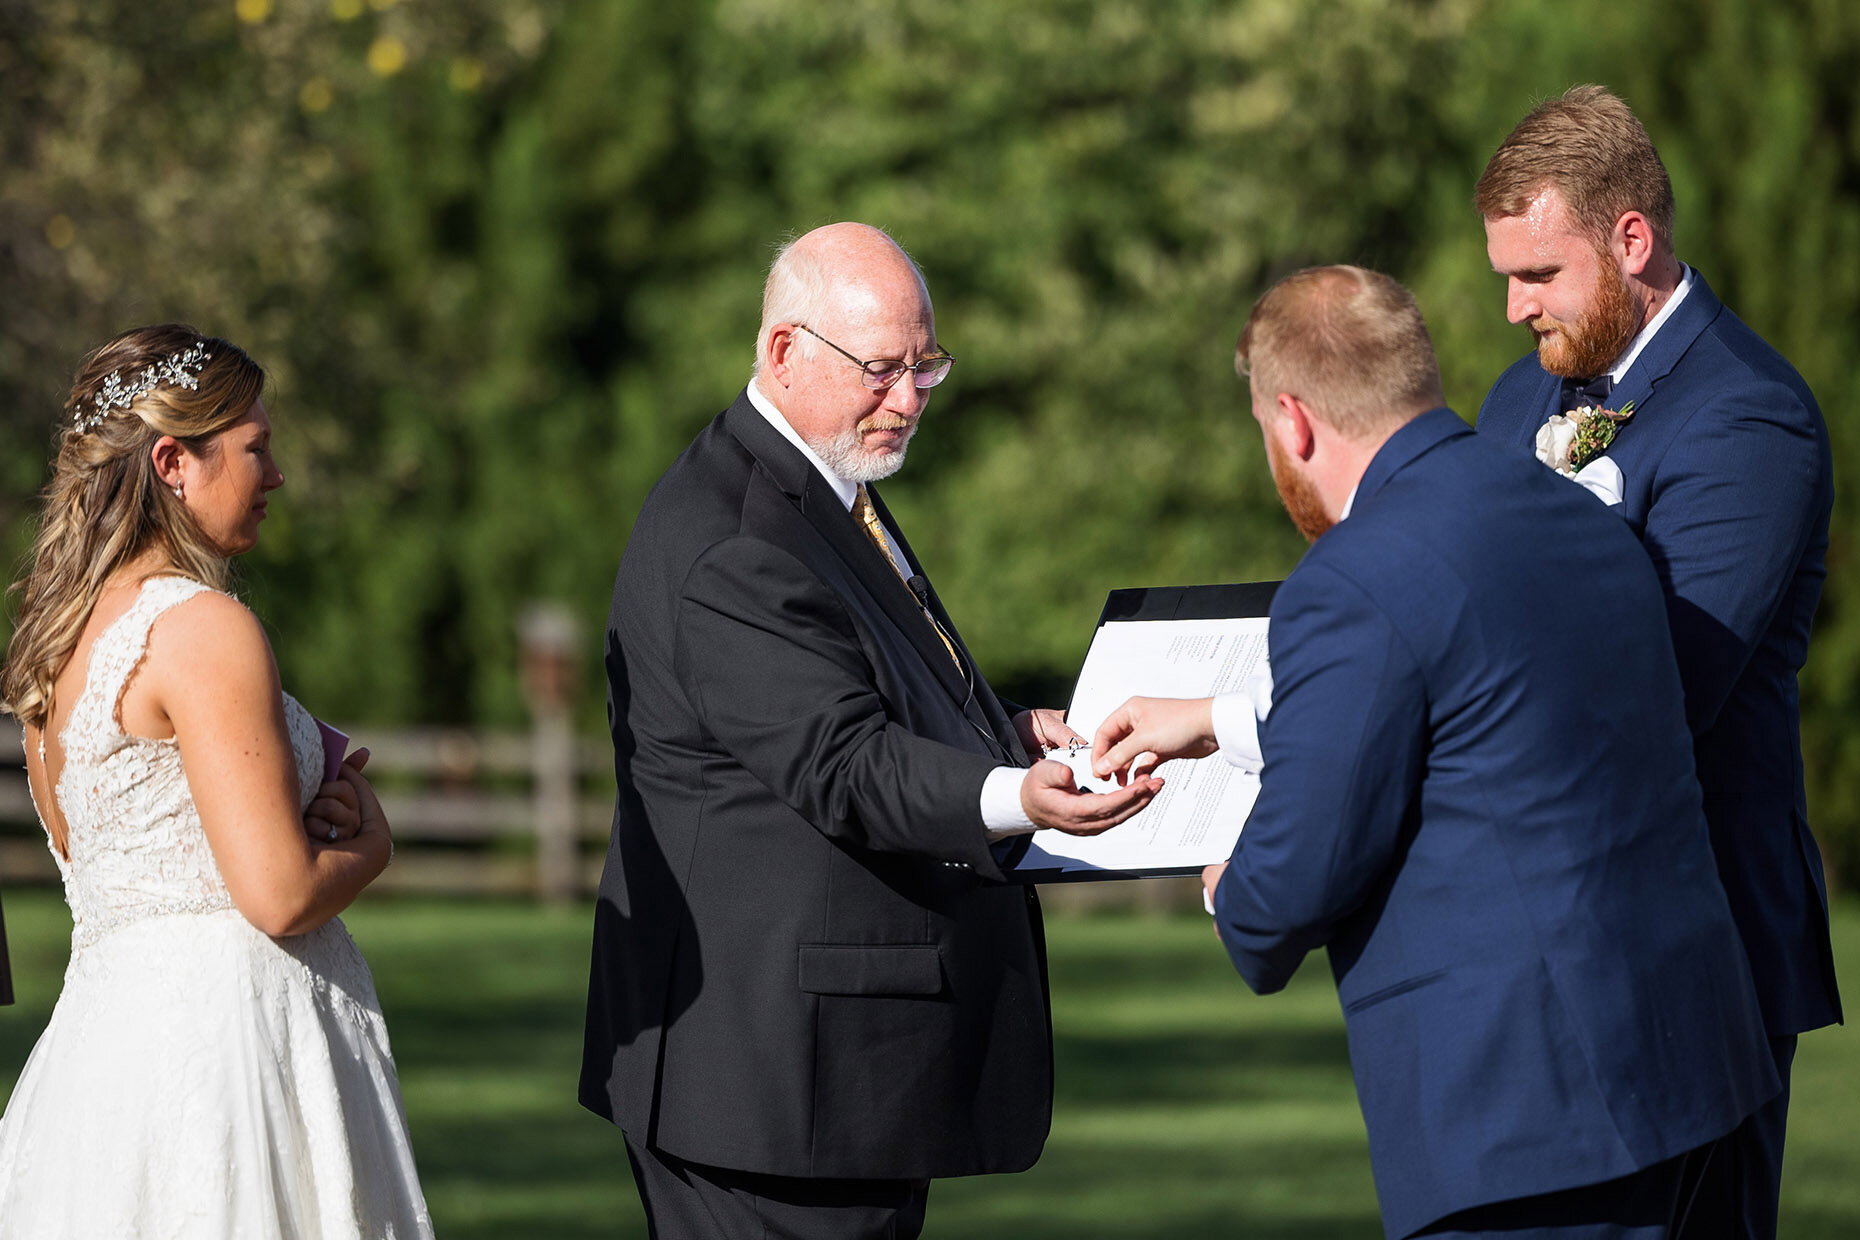 Best man hands rings to officiant 